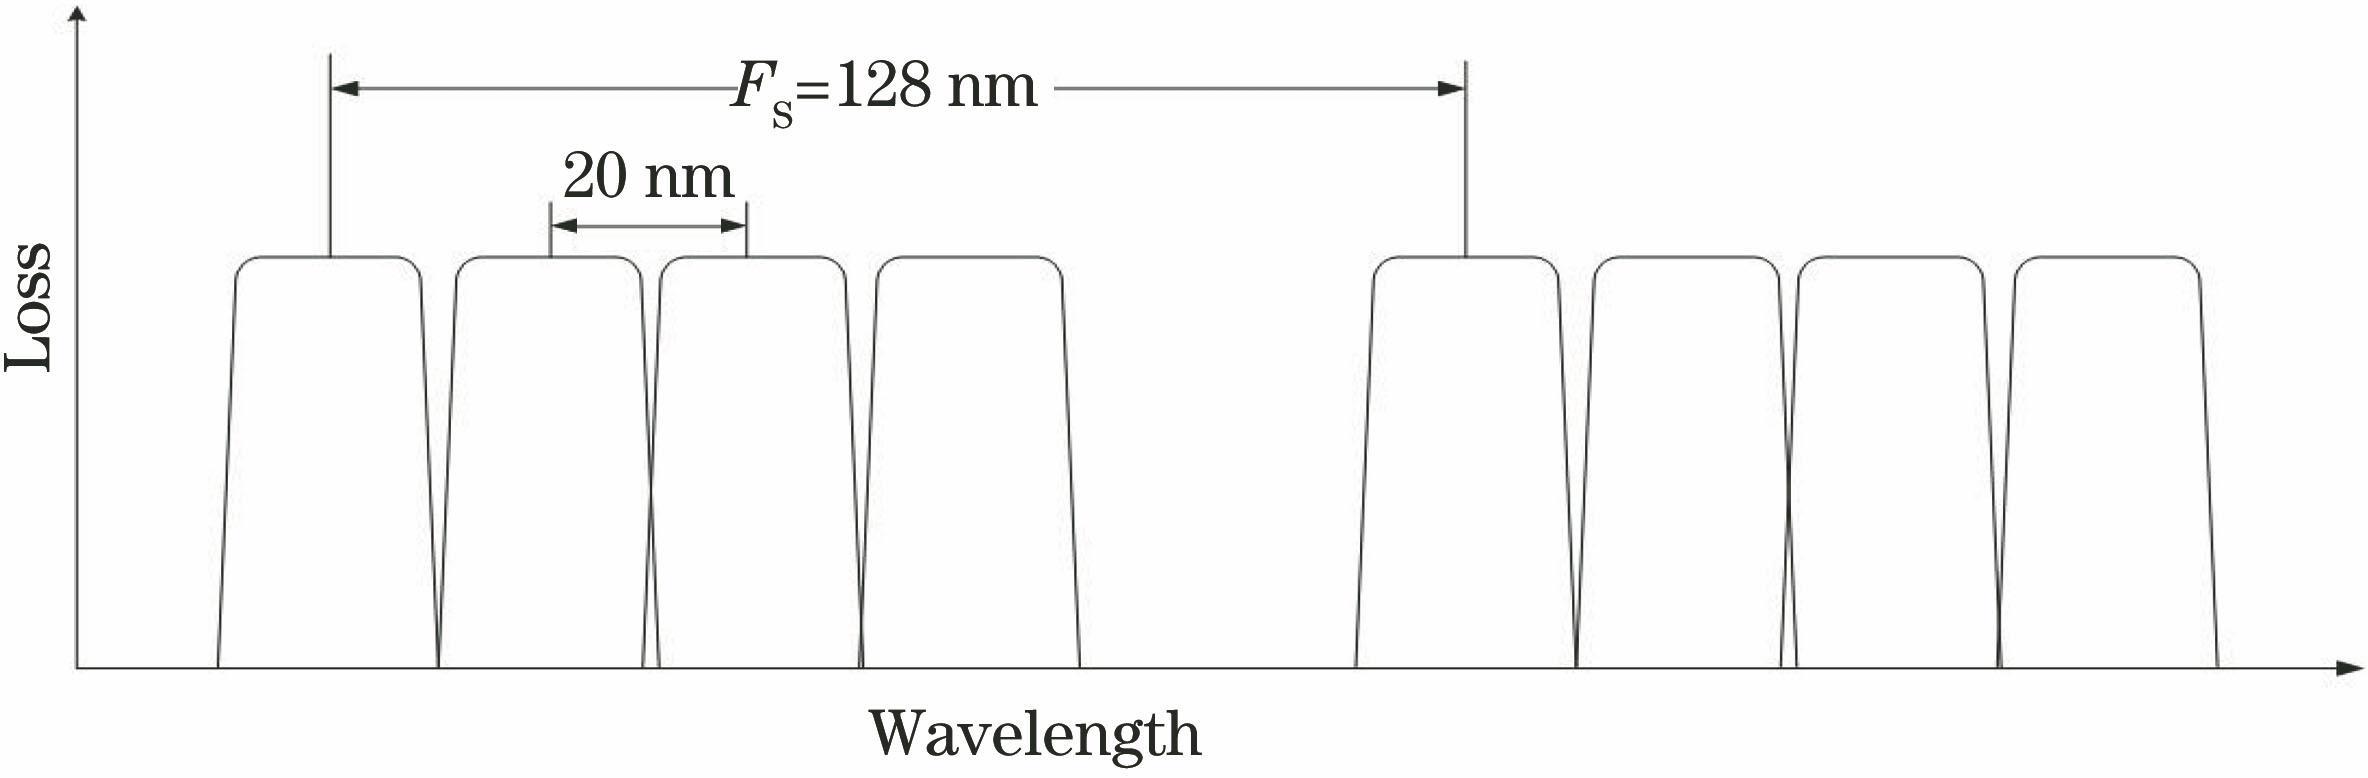 Schematic of FS selection and wavelength assignment